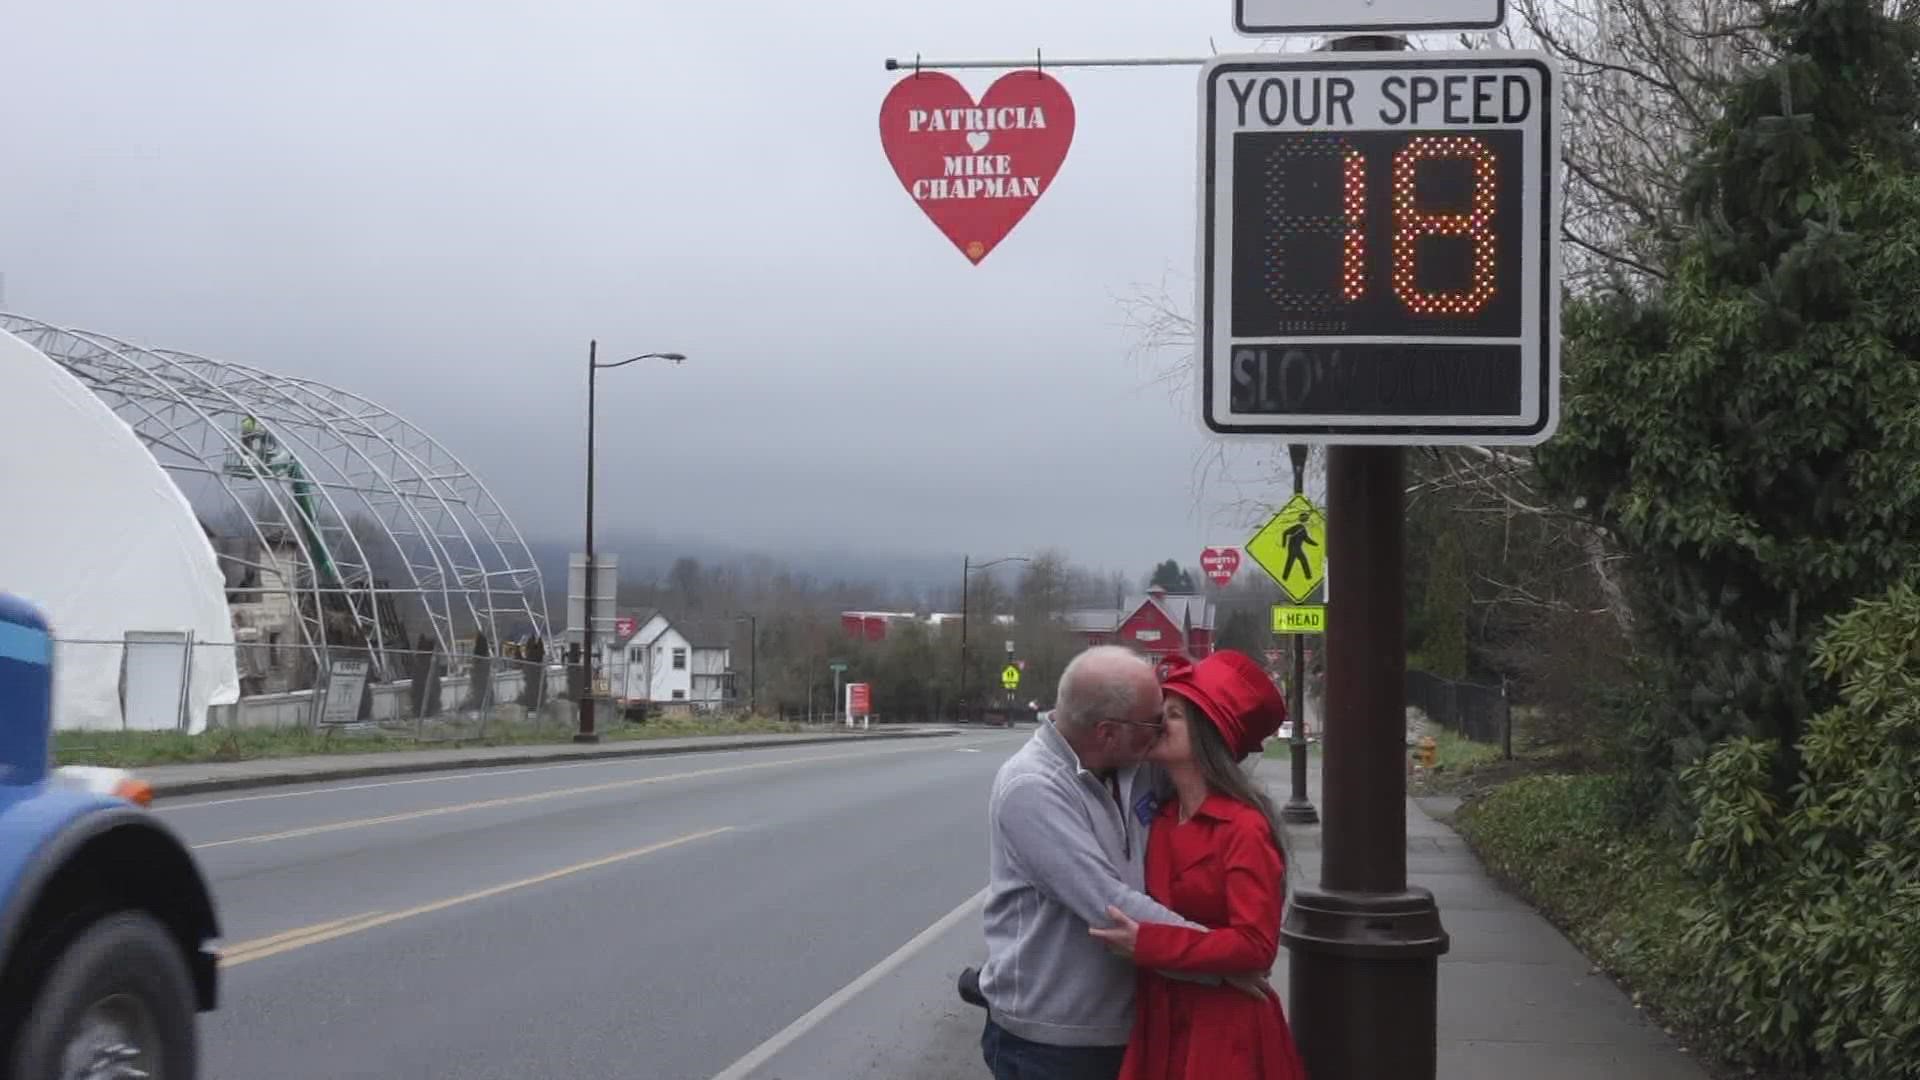 Each year, the Rotary Club in Duvall allows people to buy custom hearts that are hung up on Main Street in town. This year's efforts have sold out.